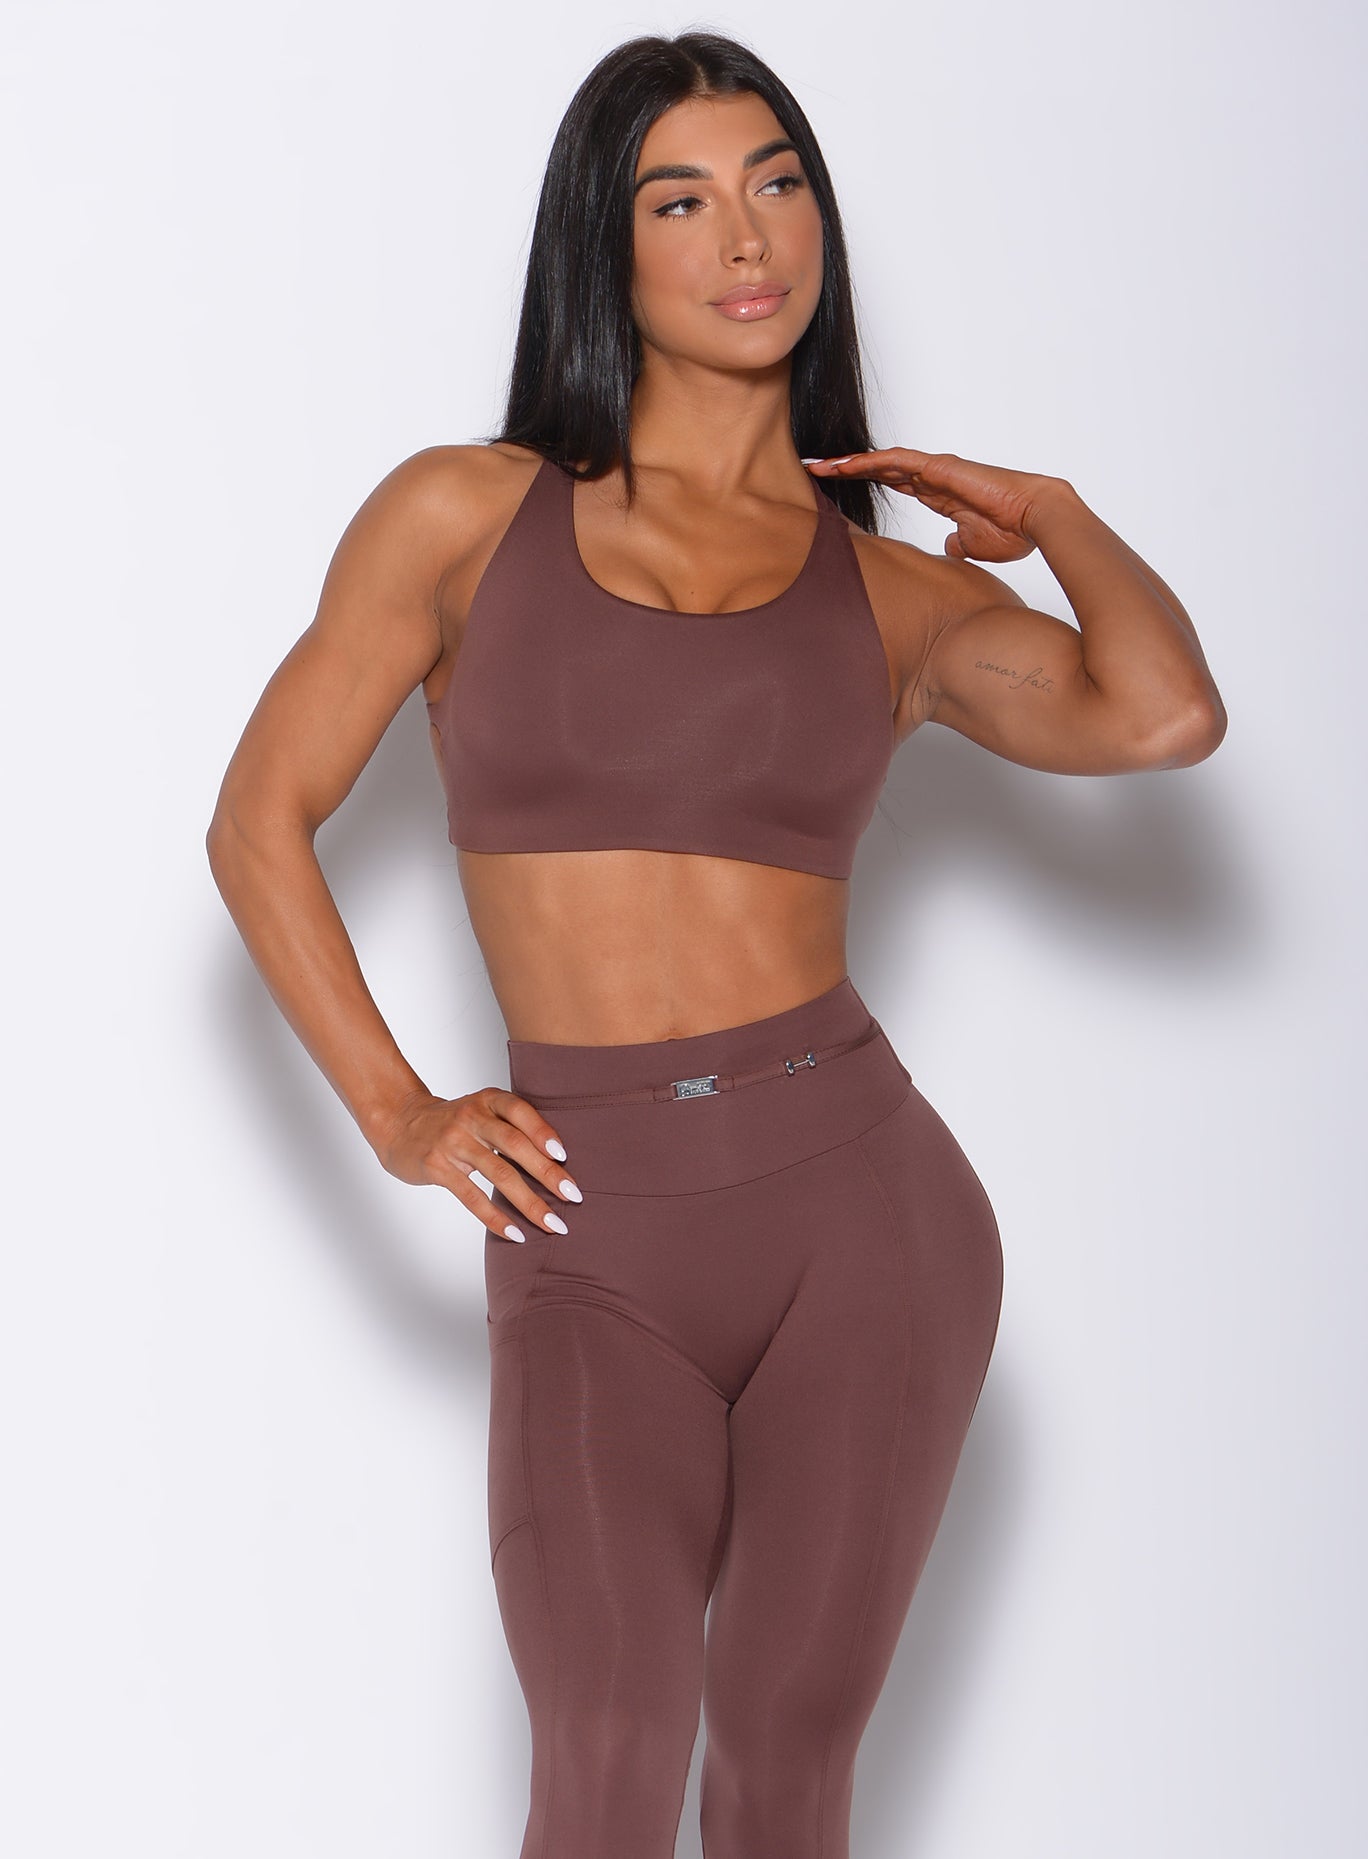 Front profile view of a model wearing our barbell sports bra in chocolate color and a matching leggings